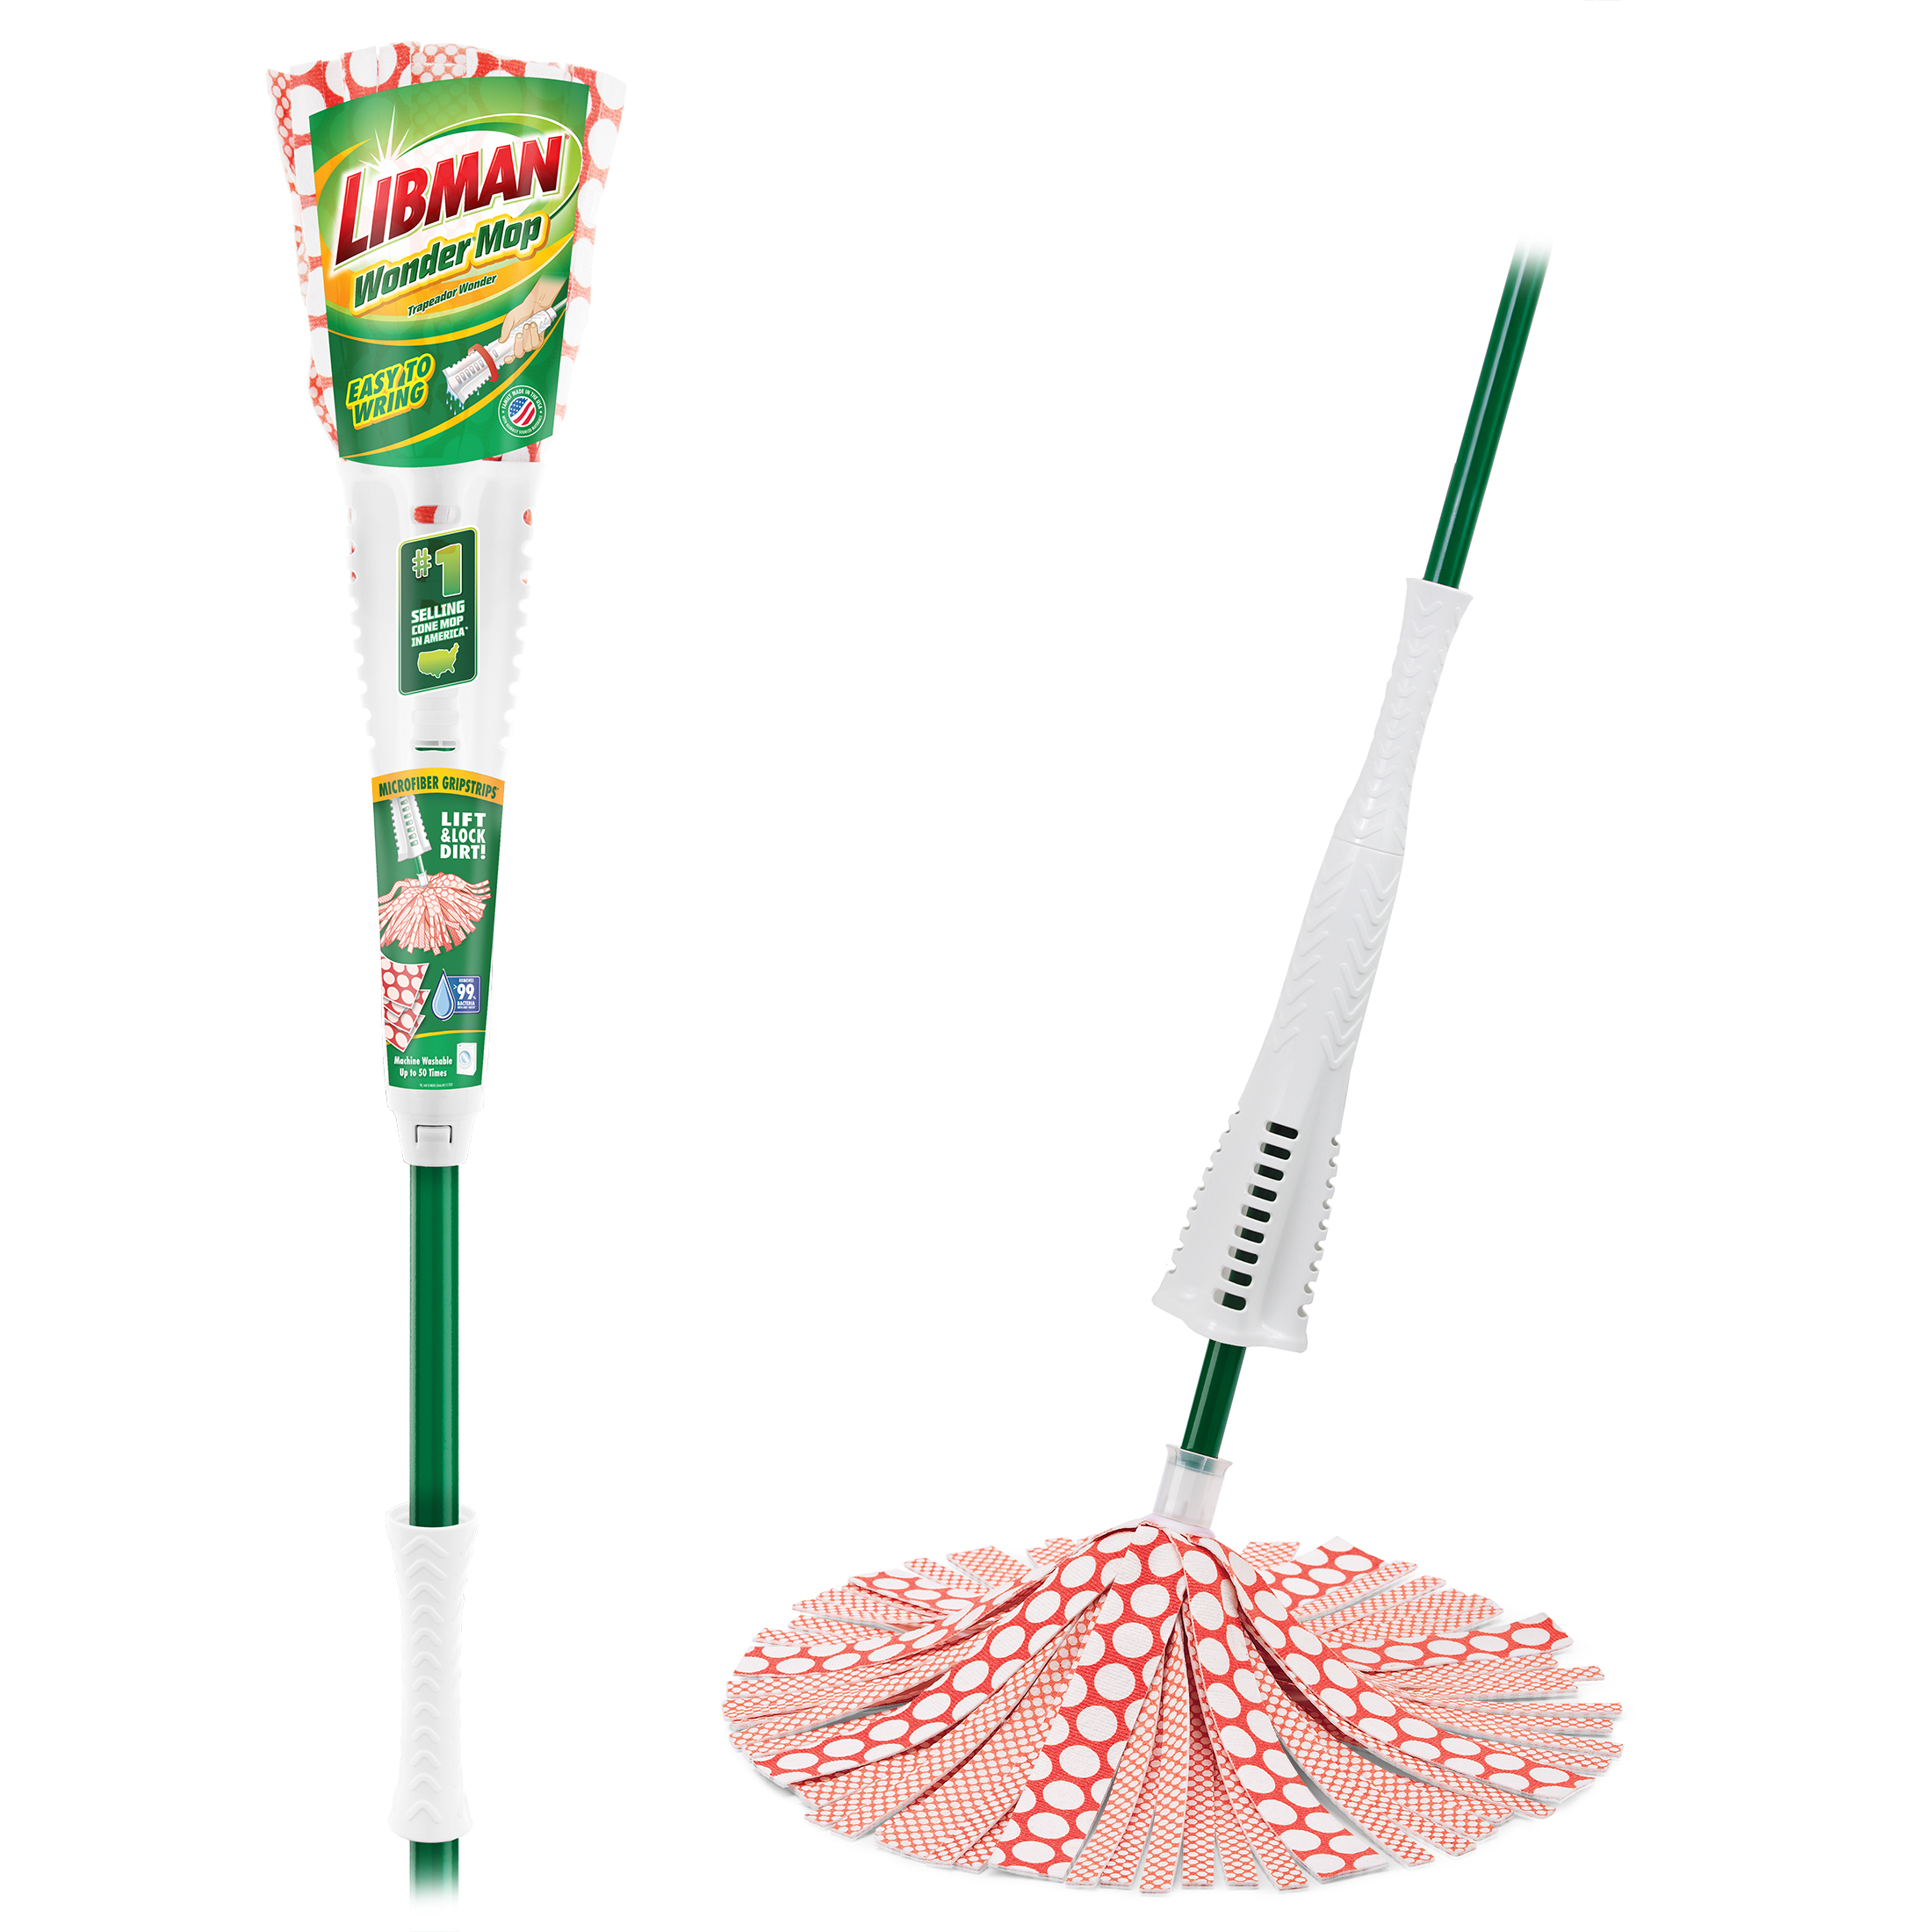 Libman Wonder Mop. ® Green and White Handle. - image 1 of 6